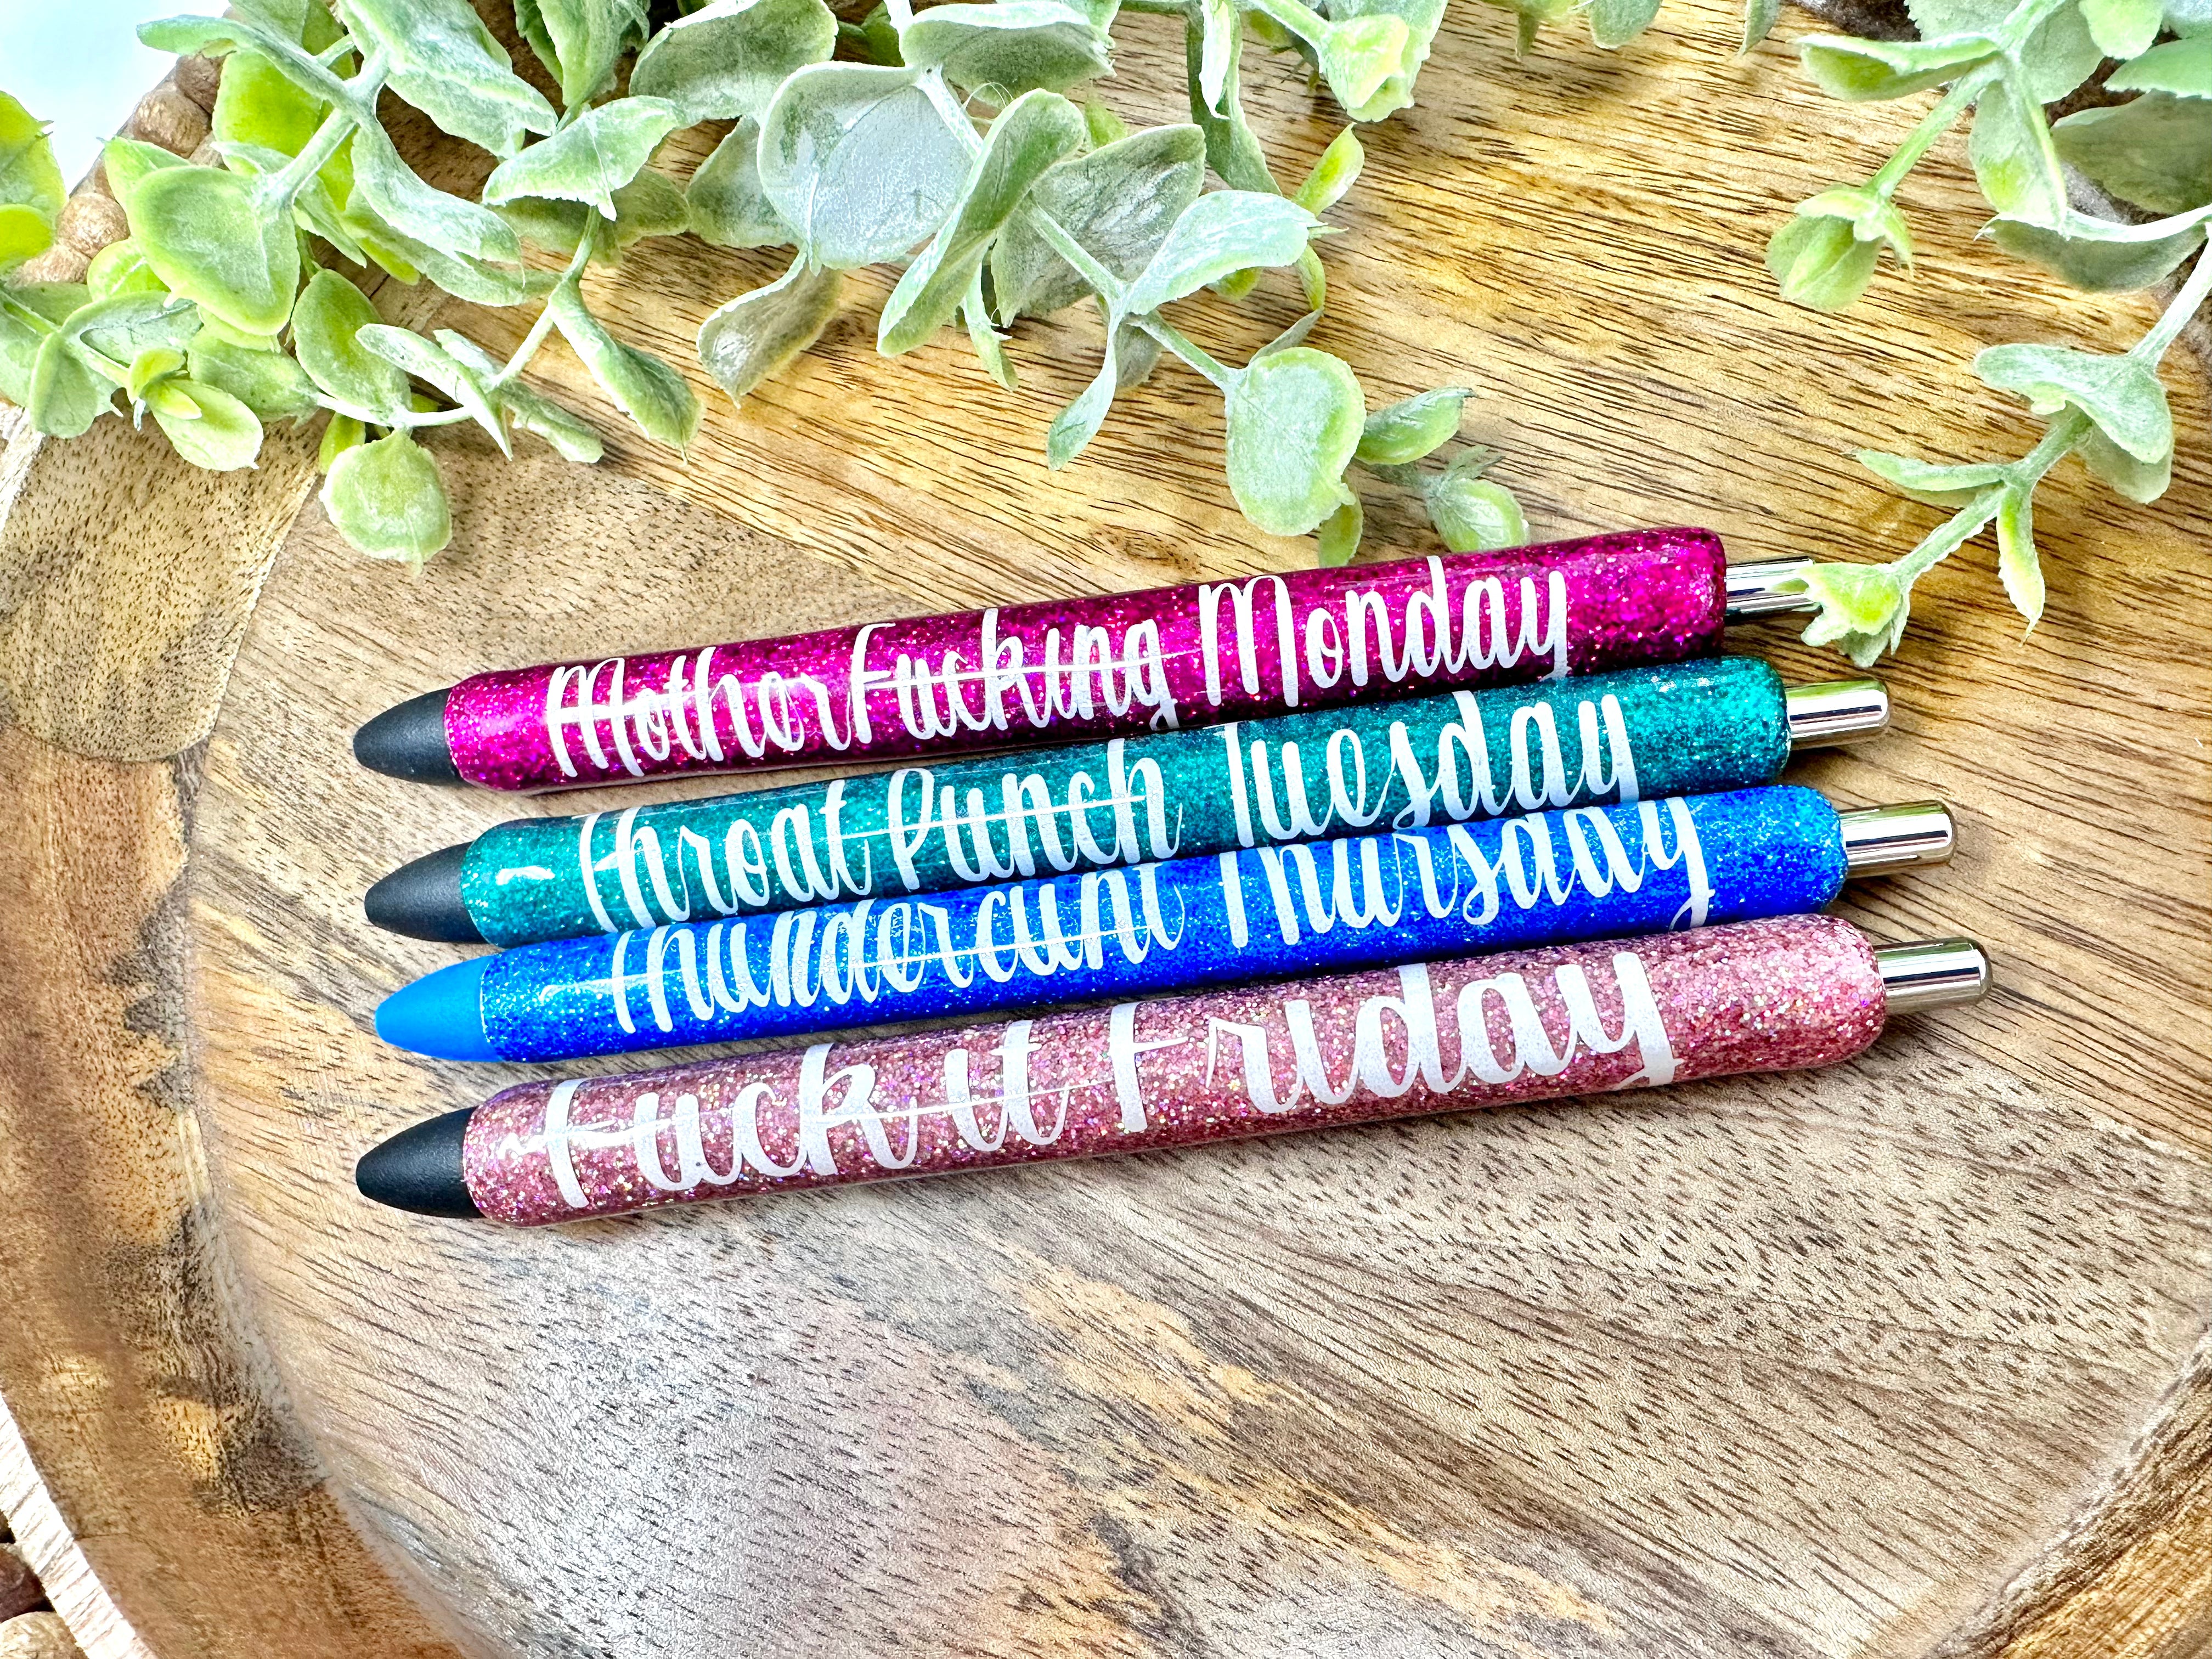 Weekday Potty Mouth Pens